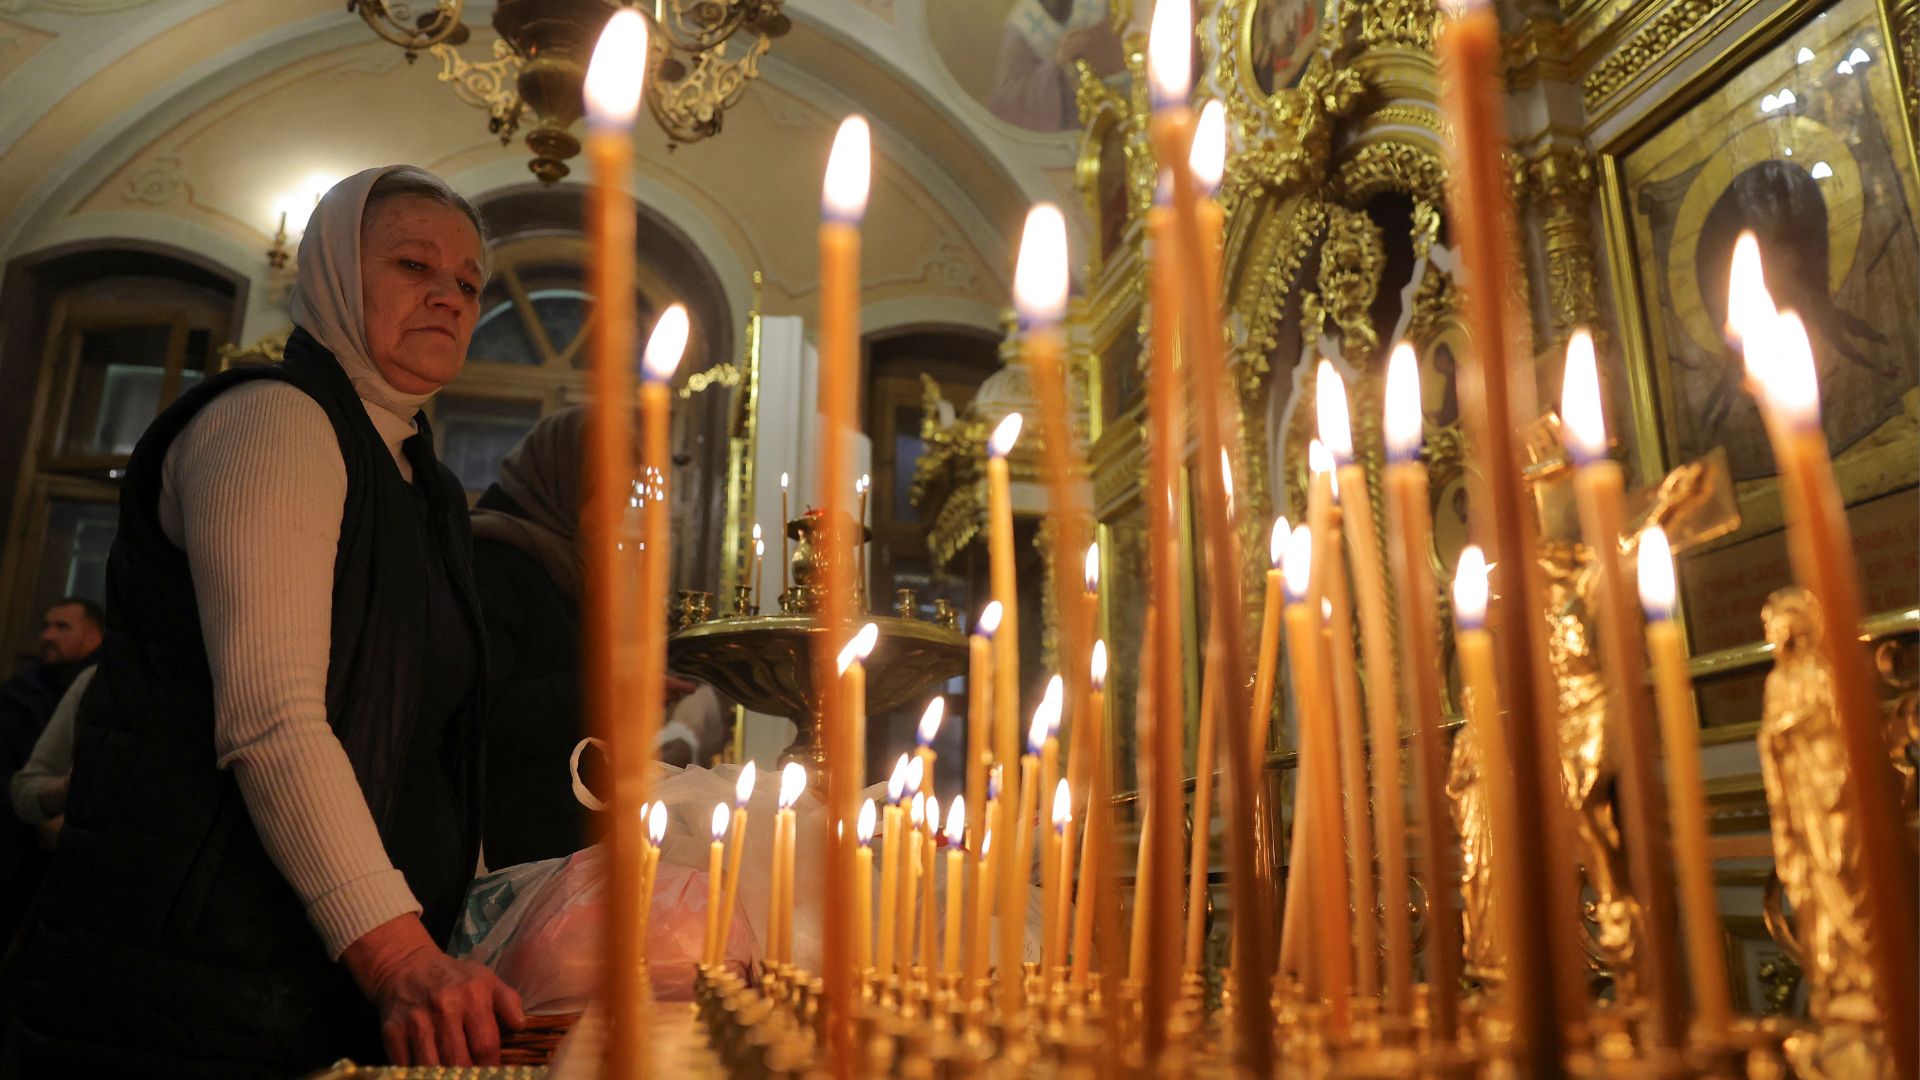 An Orthodox Christian attends a Christmas service at a cathedral in Moscow, Russia. /Evgenia Novozhenina/Reuters